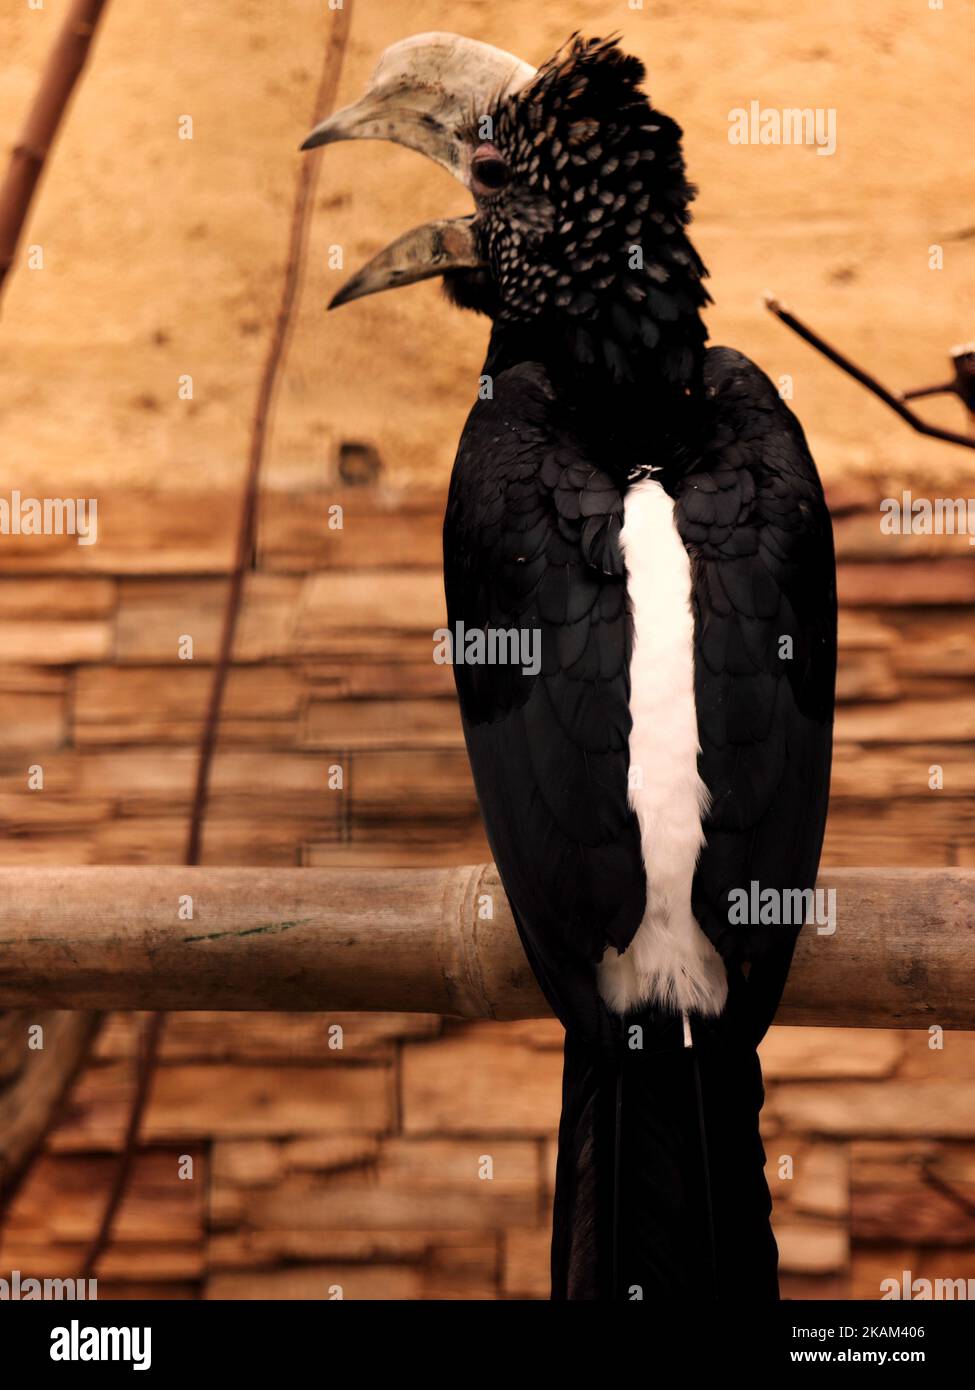 A Silvery-cheeked hornbill on a wooden branch, close-up, vertical Stock Photo